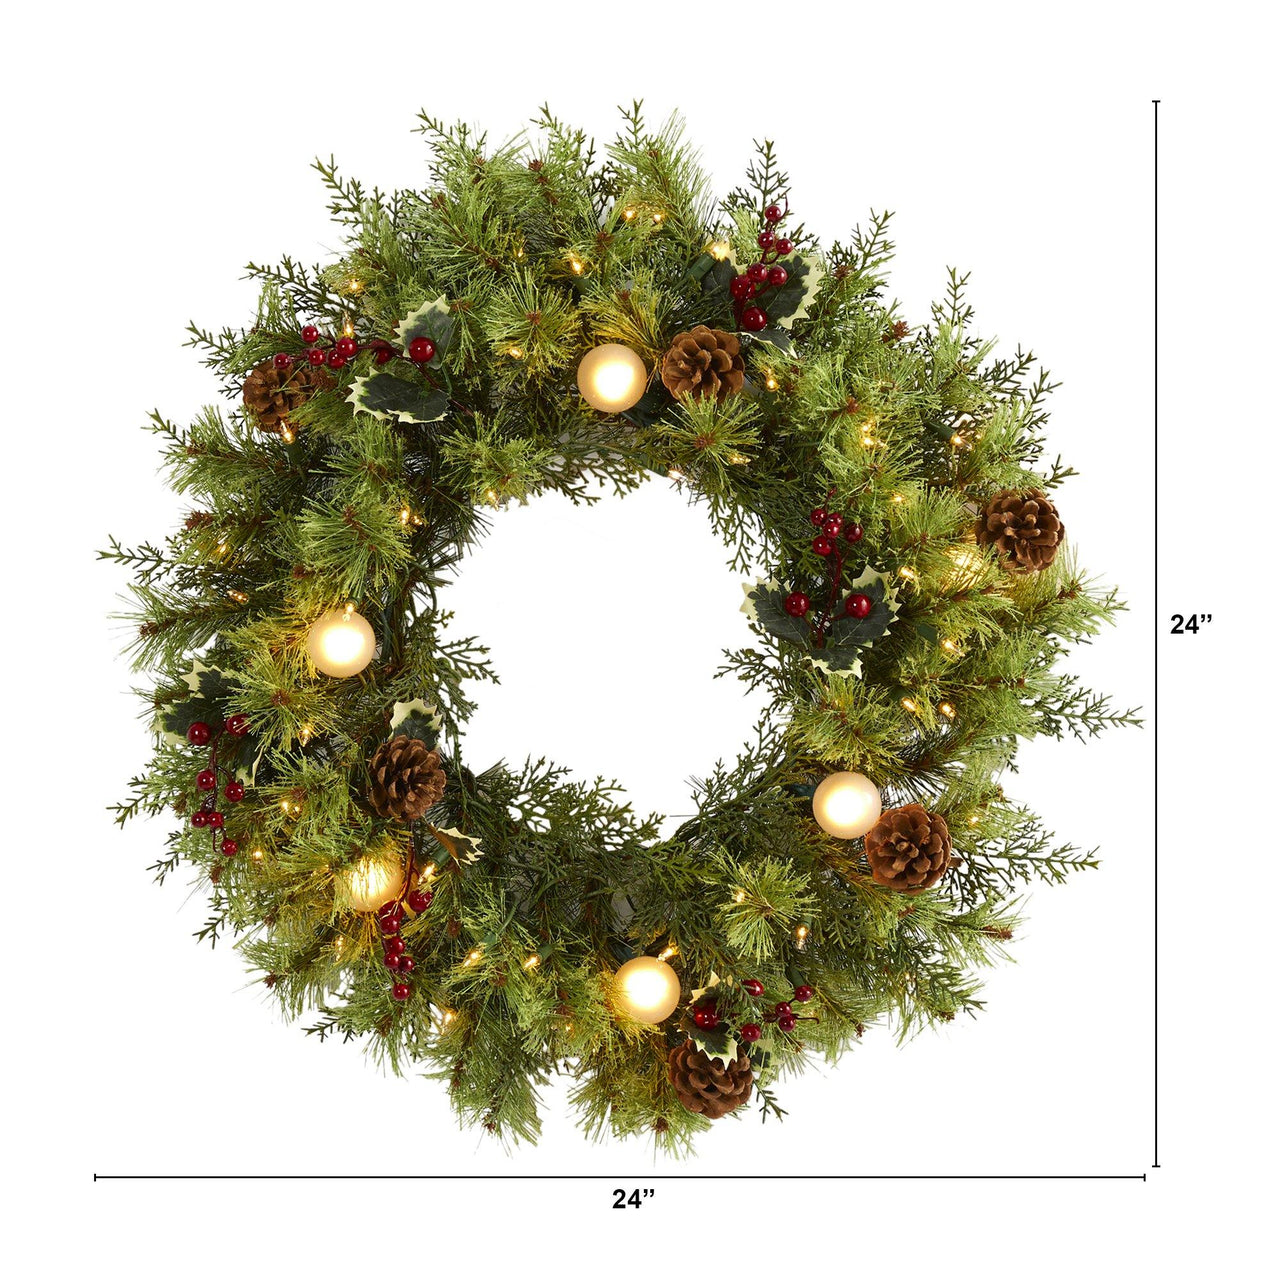 24” Christmas Artificial Wreath with 50 White Warm Lights, 7 Globe Bulbs, Berries and Pine Cones - The Fox Decor